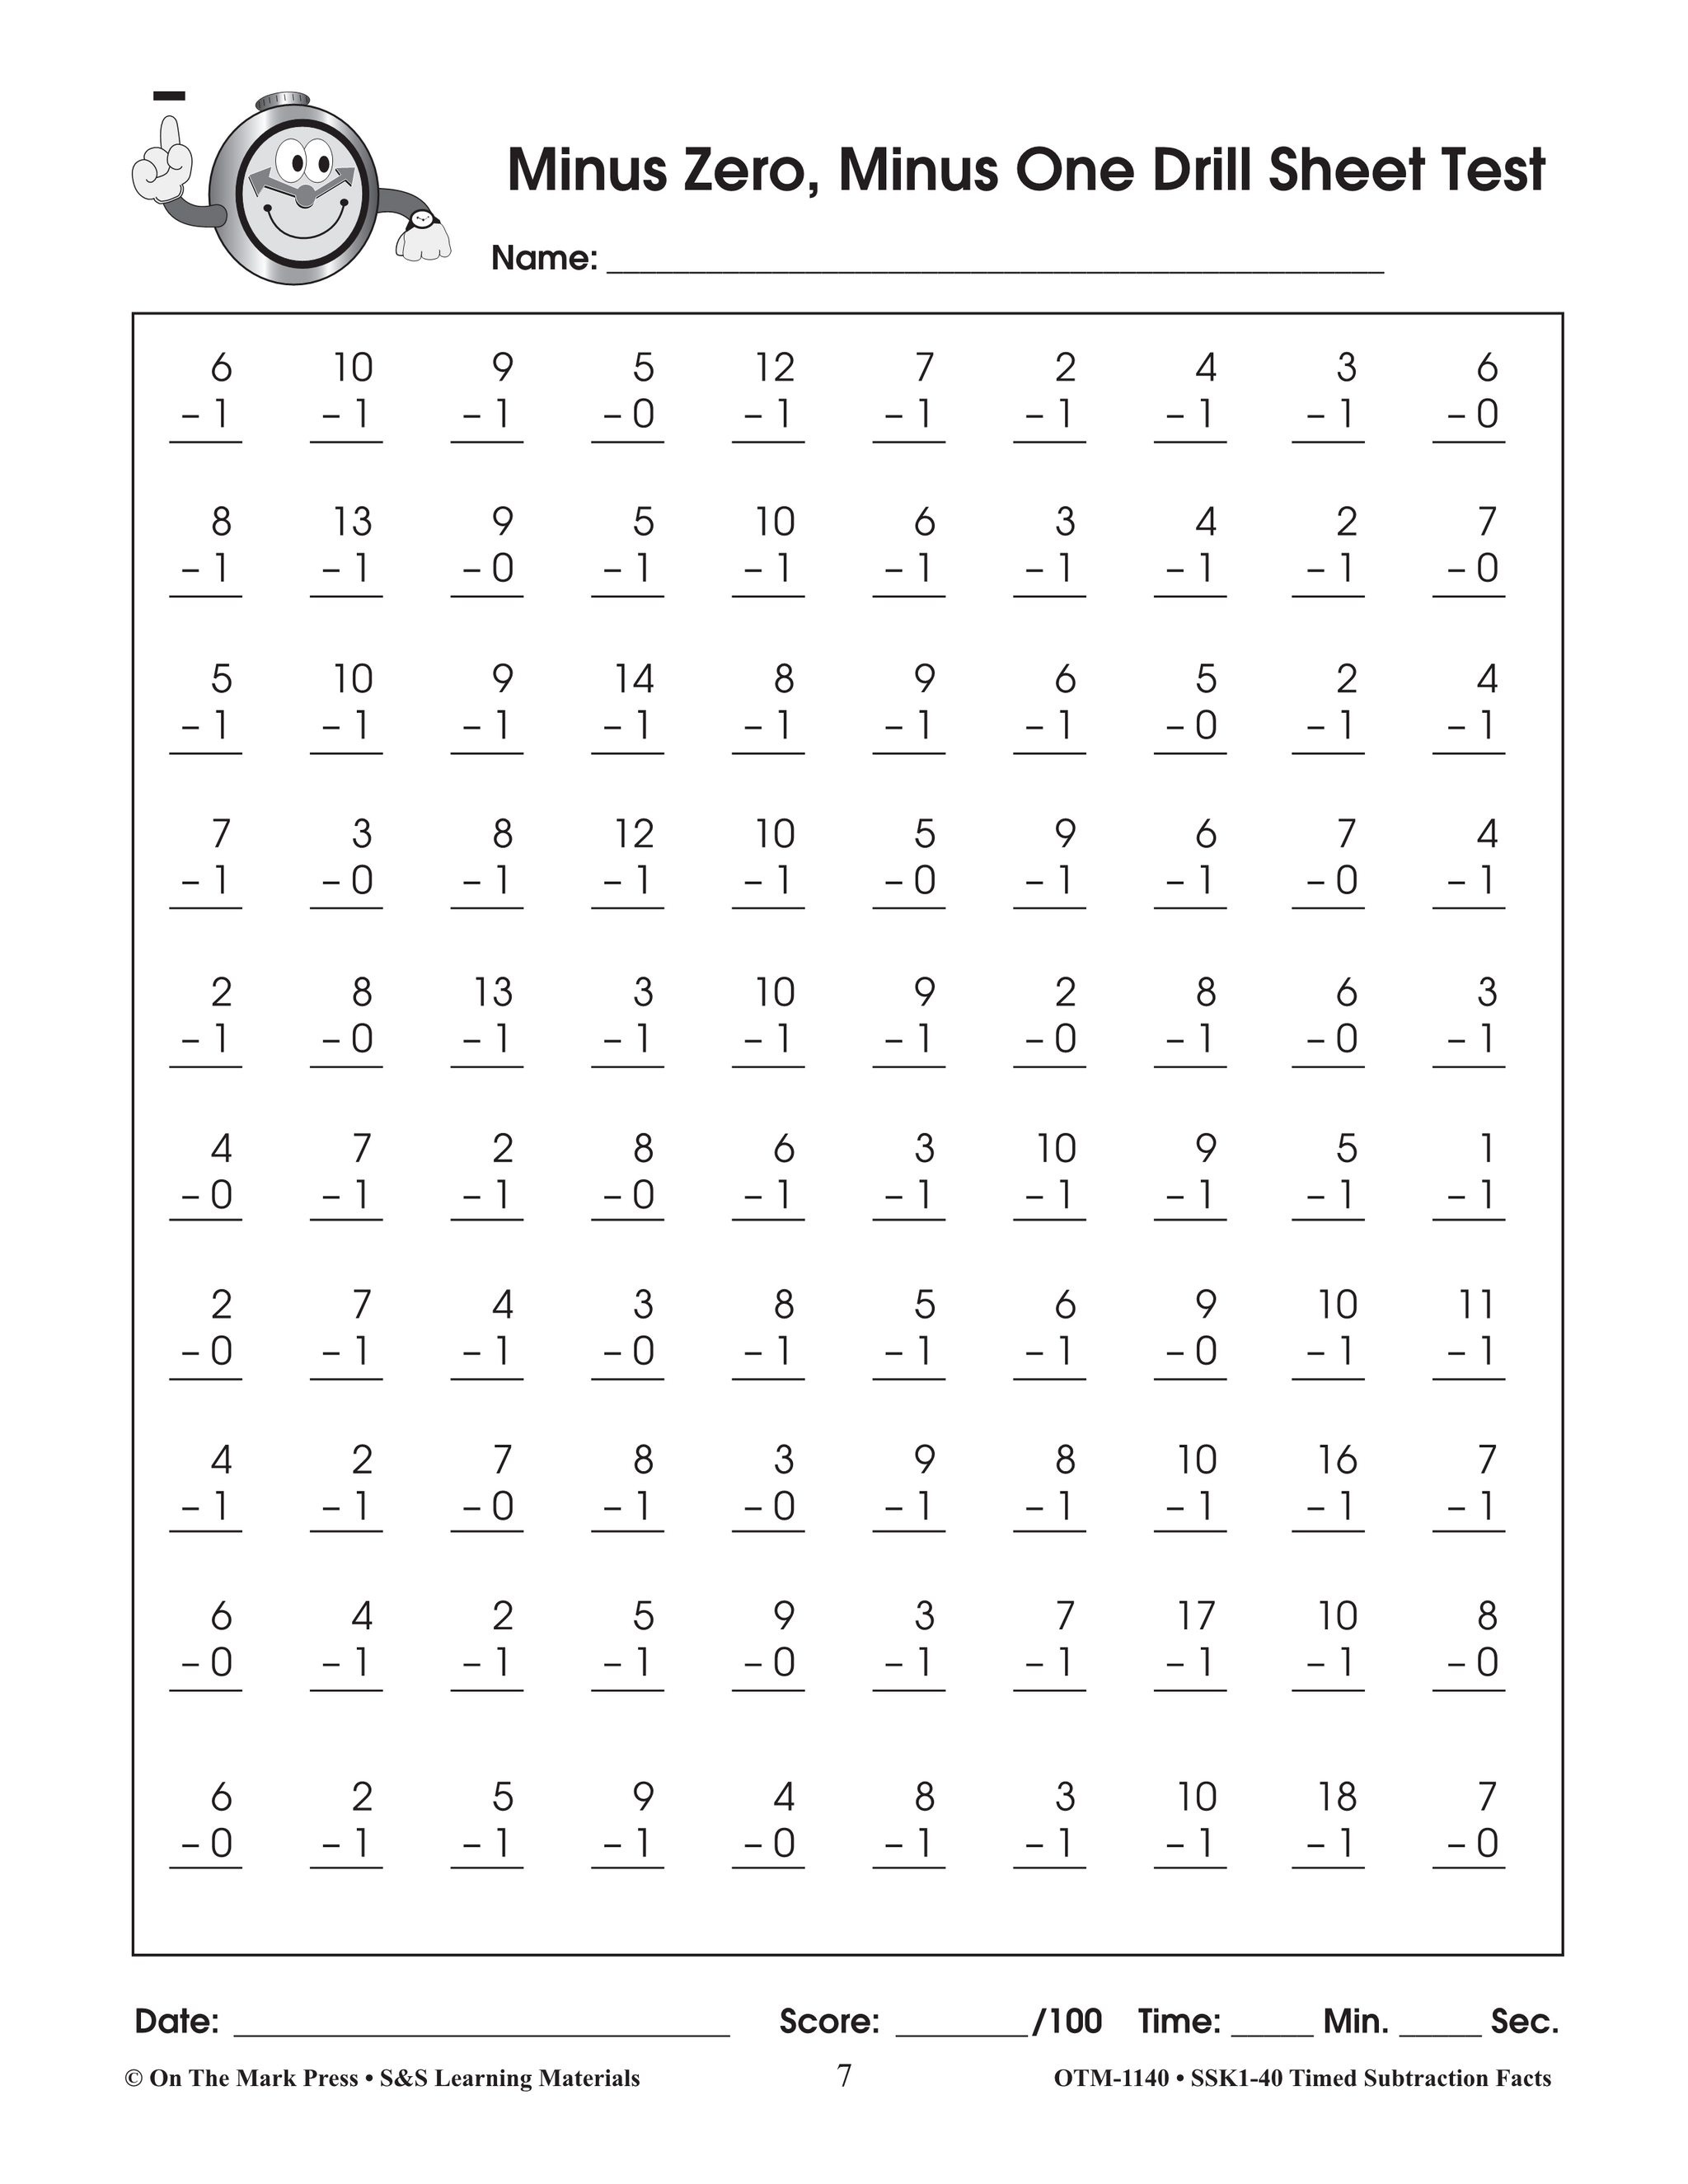 timed-subtraction-math-facts-worksheets-1st-grade-free-printable-it